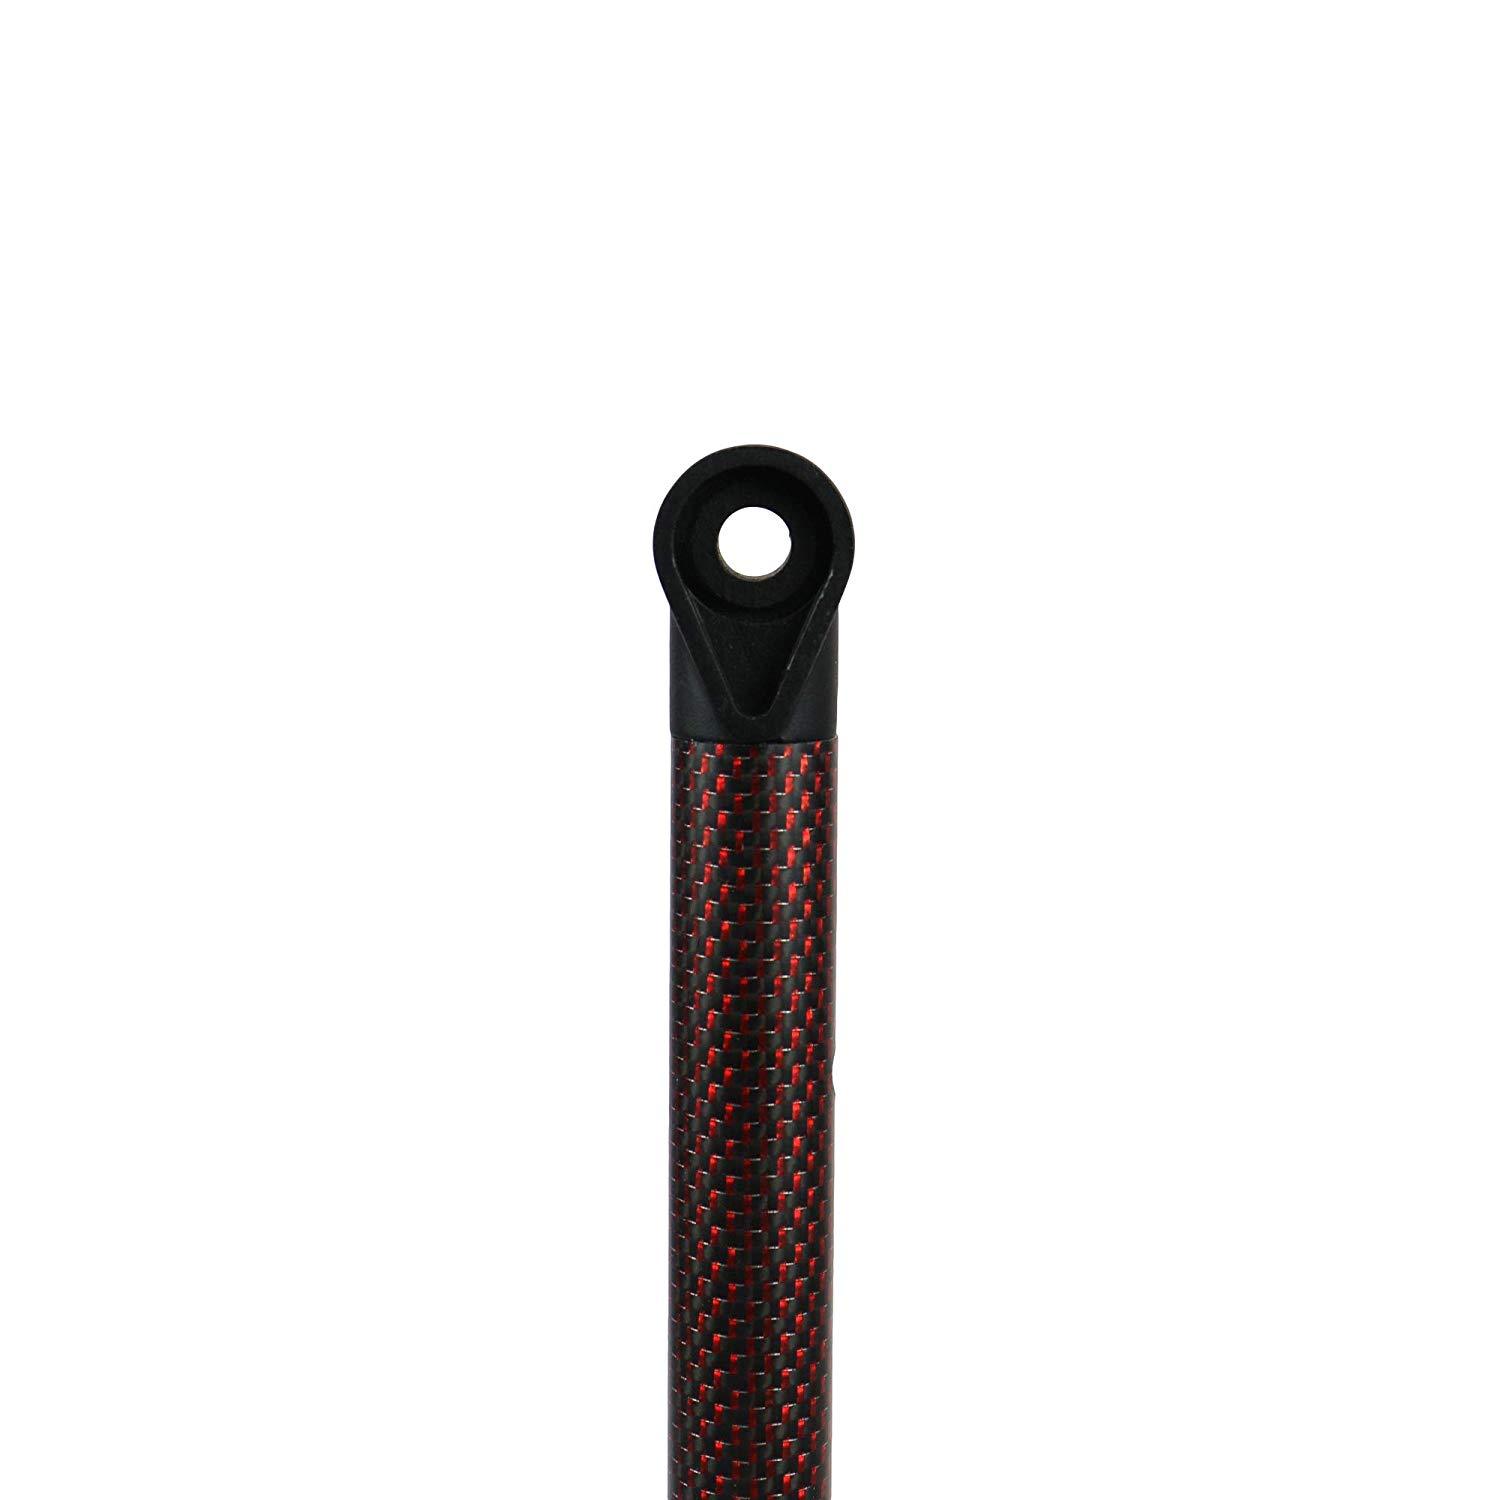 Detect-Ed Red Belly LS Carbon Fiber Lower Shaft for Minelab Equinox Detector Accessories Minelab 